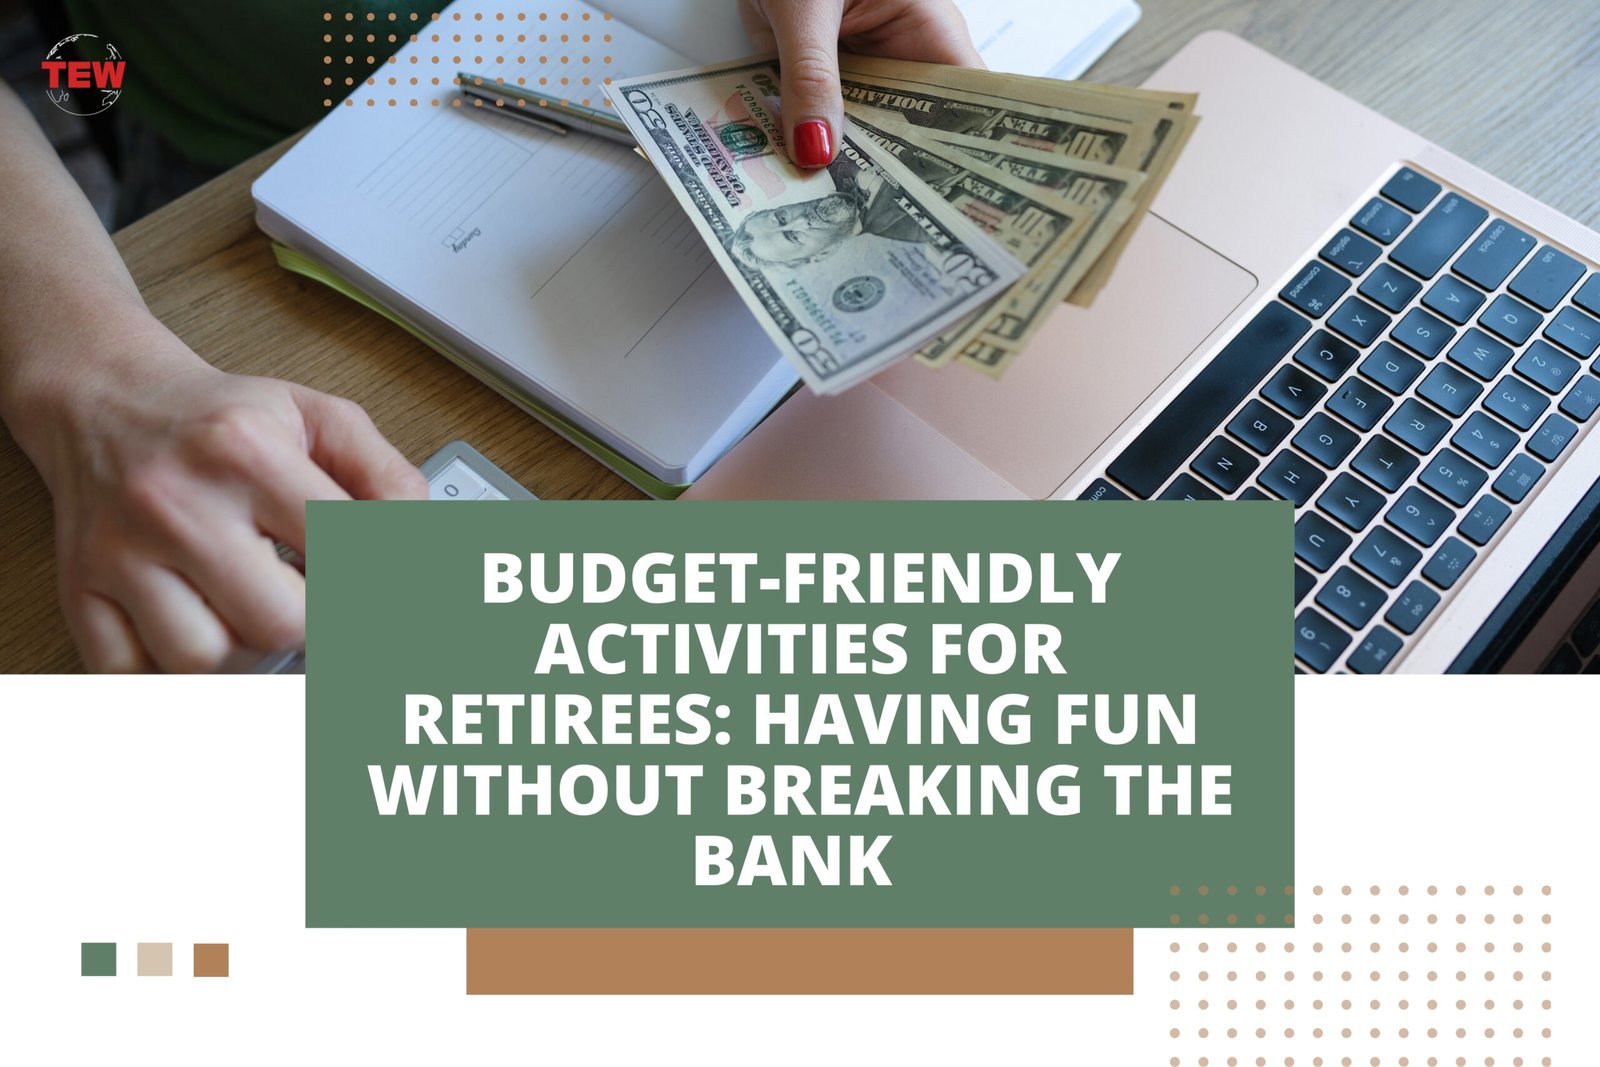 Budget-Friendly Activities for Retirees: Having Fun Without Breaking the Bank 07/13